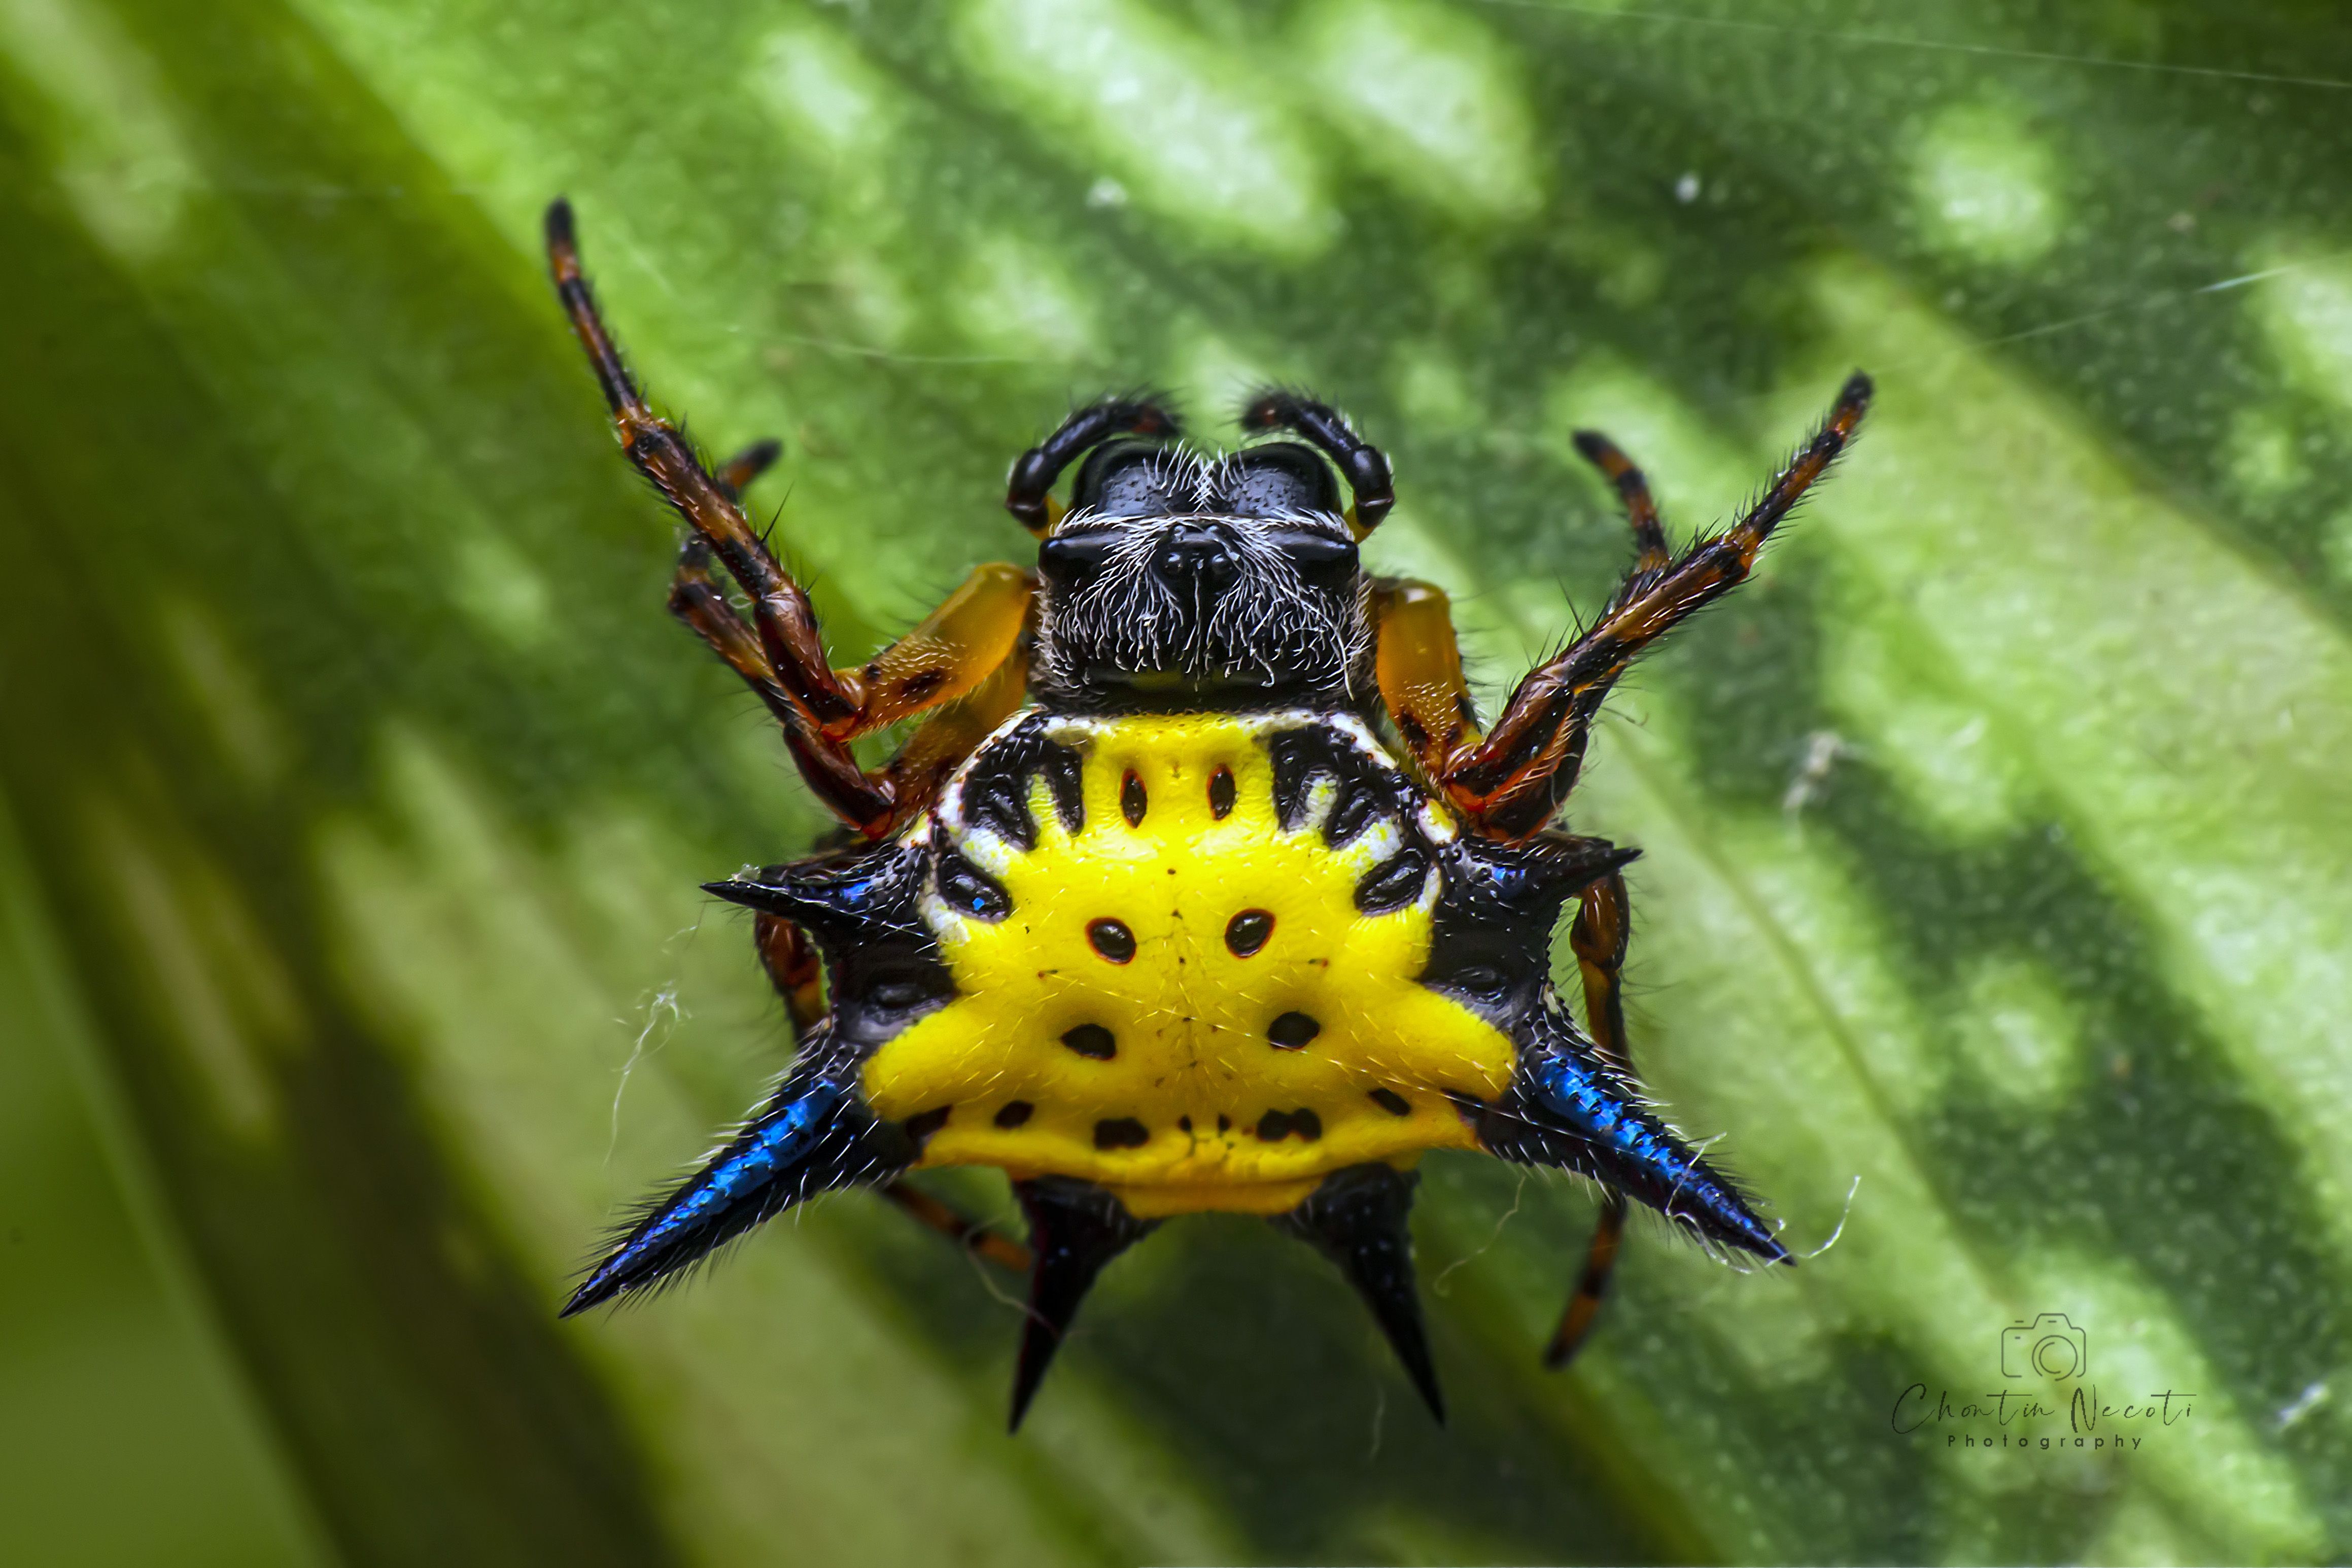 Gasteracantha, hasselti, spider, small, animal, nature, natural, beauty, outdoor, yellow, green, NeCoTi ChonTin